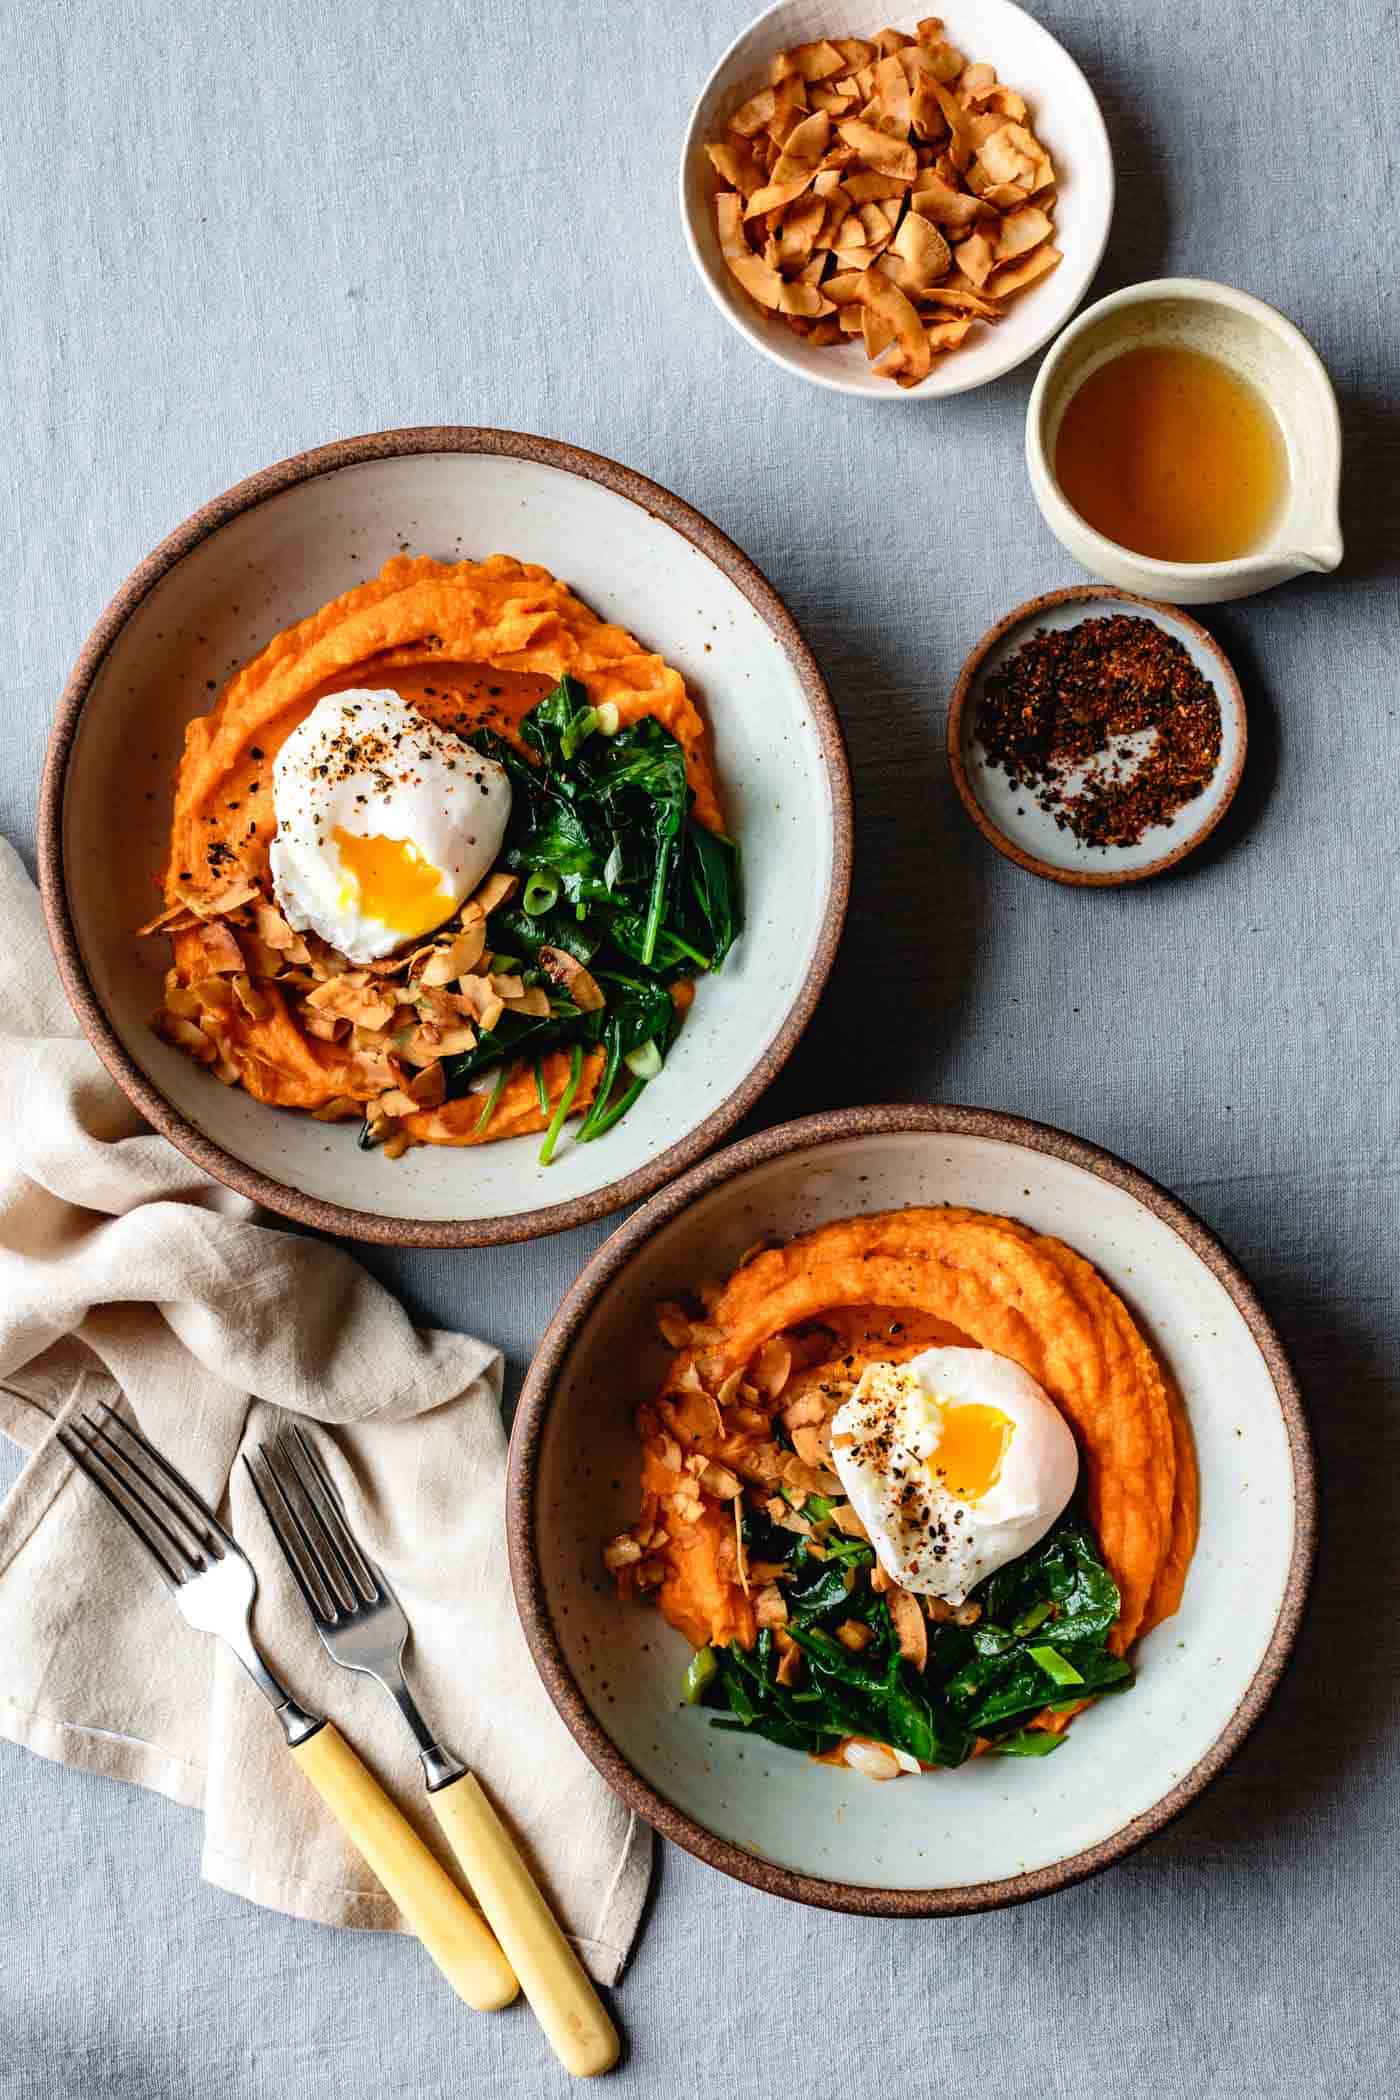 two sweet potato breakfast bowls are arranged on a linen tabletop with forks and napkins, ready to eat!